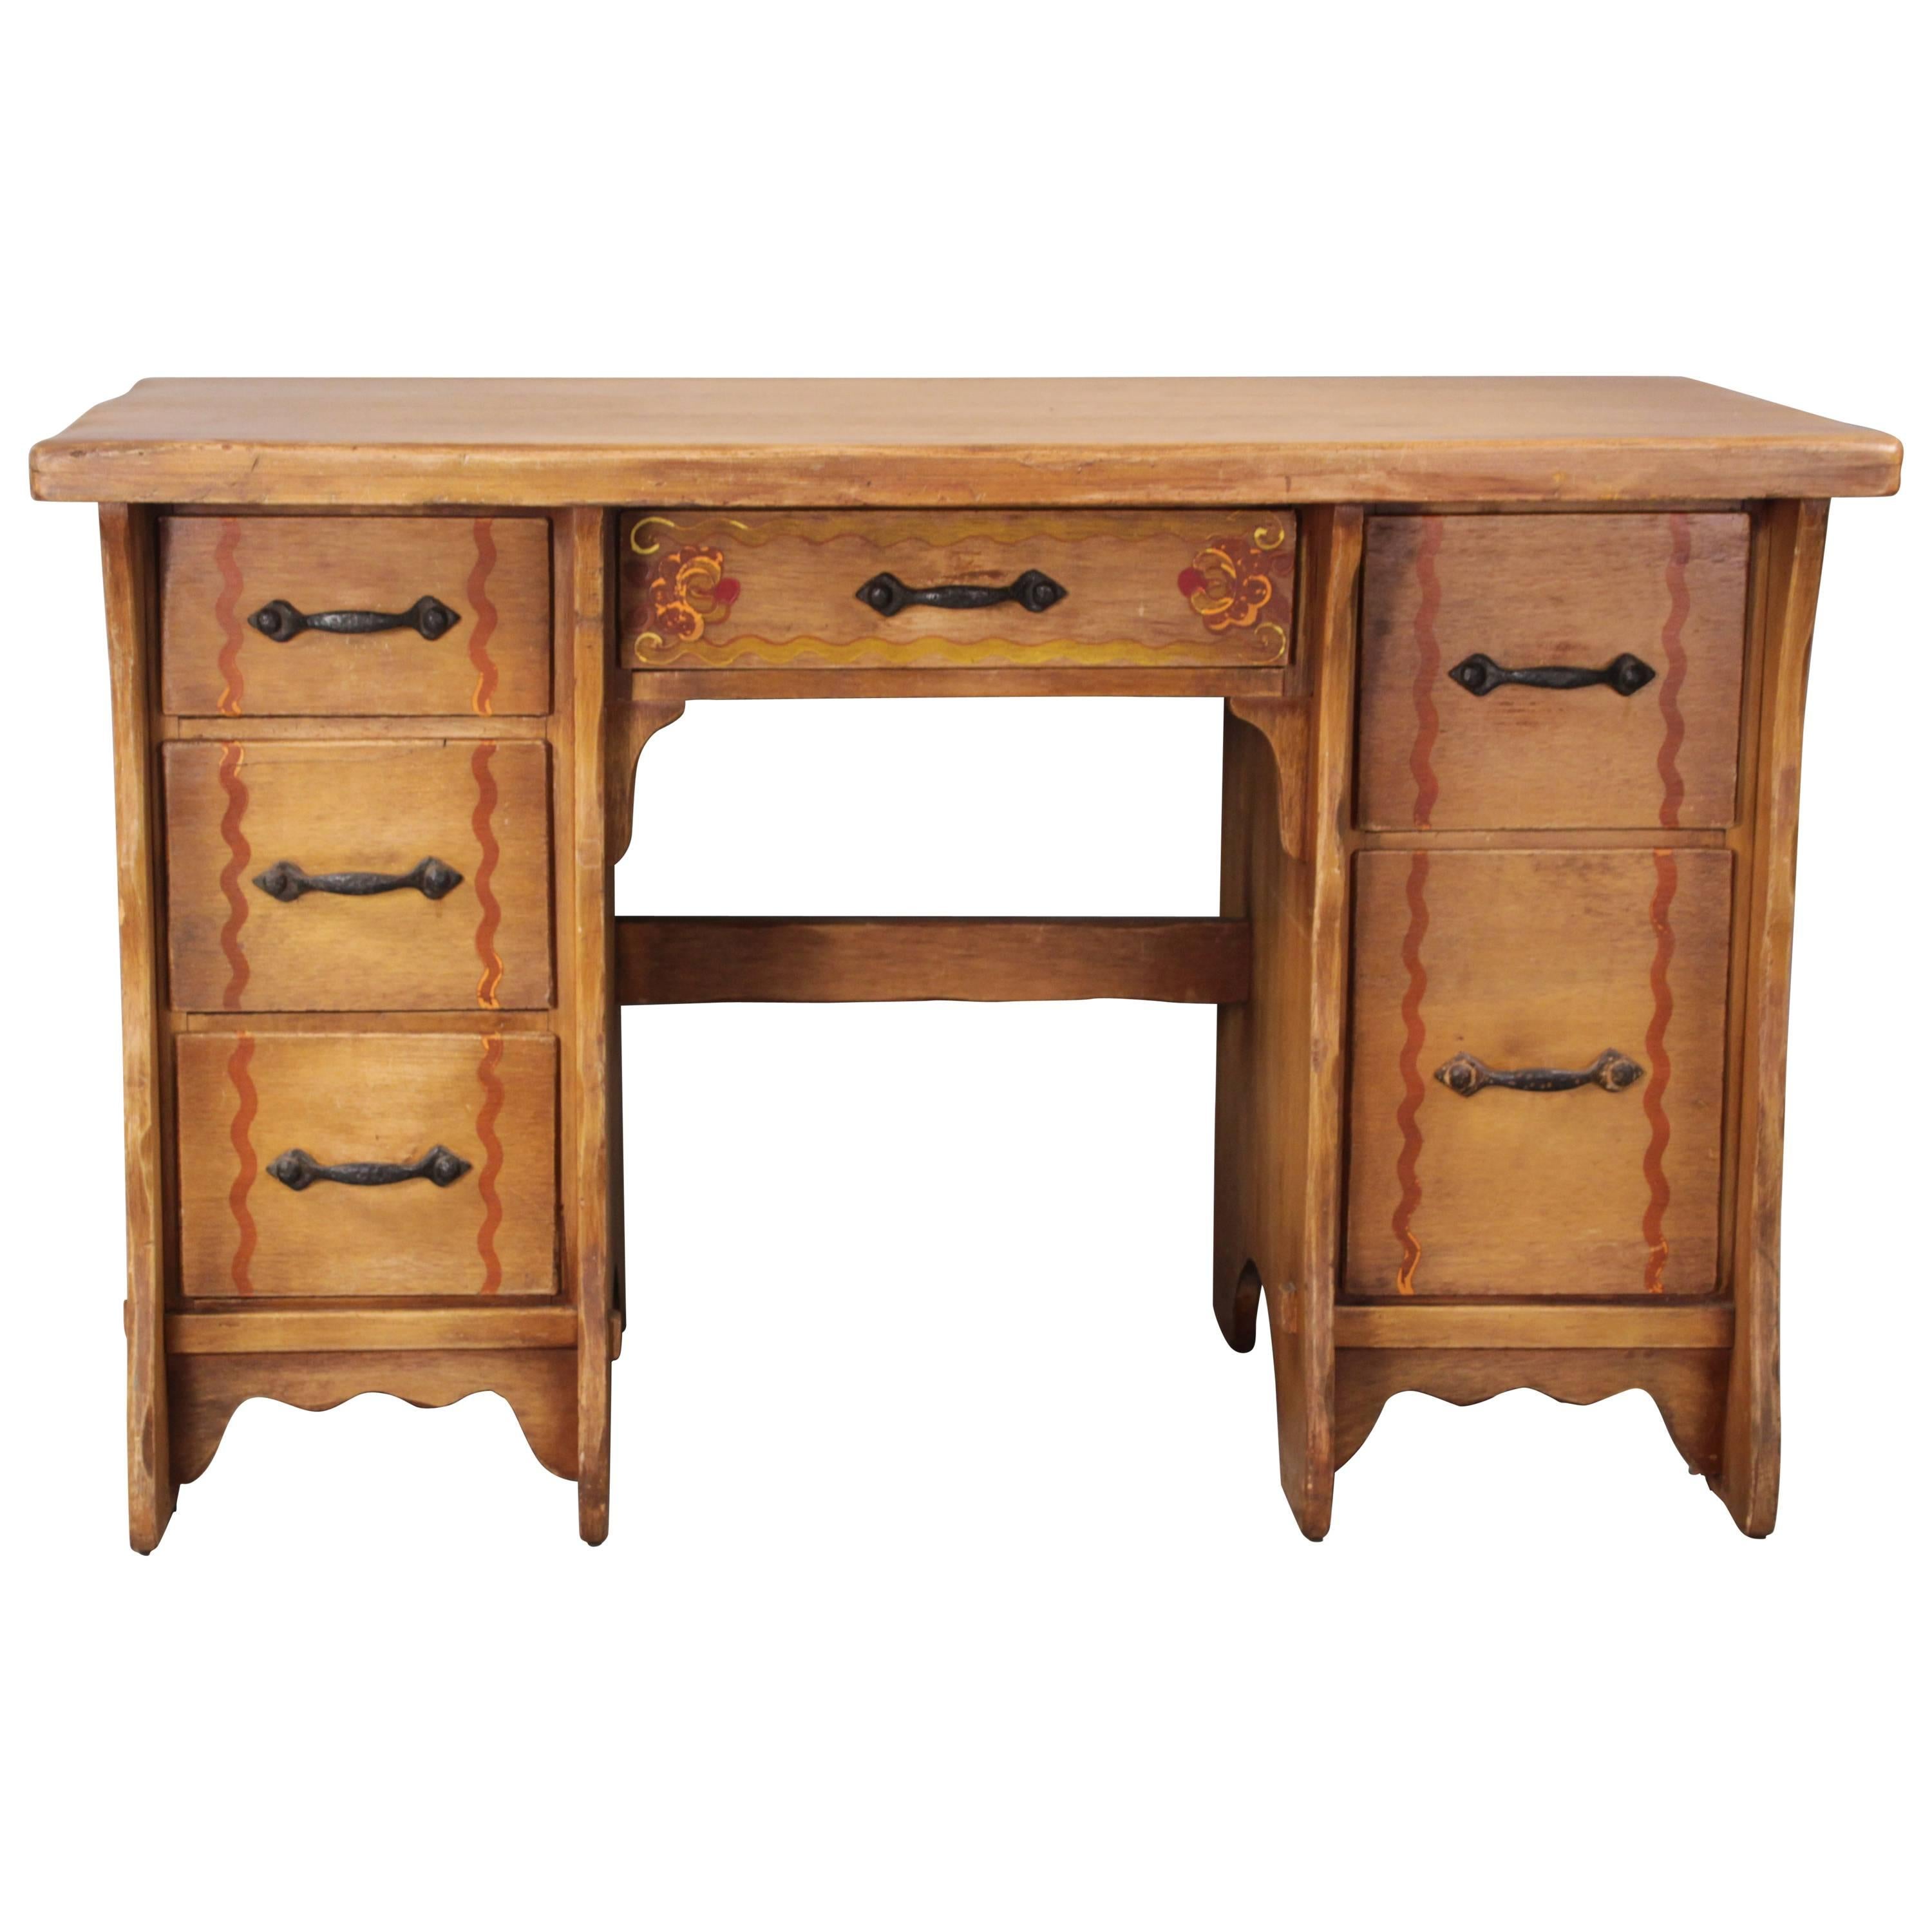 1930s Larger Monterey Period Painted Desk